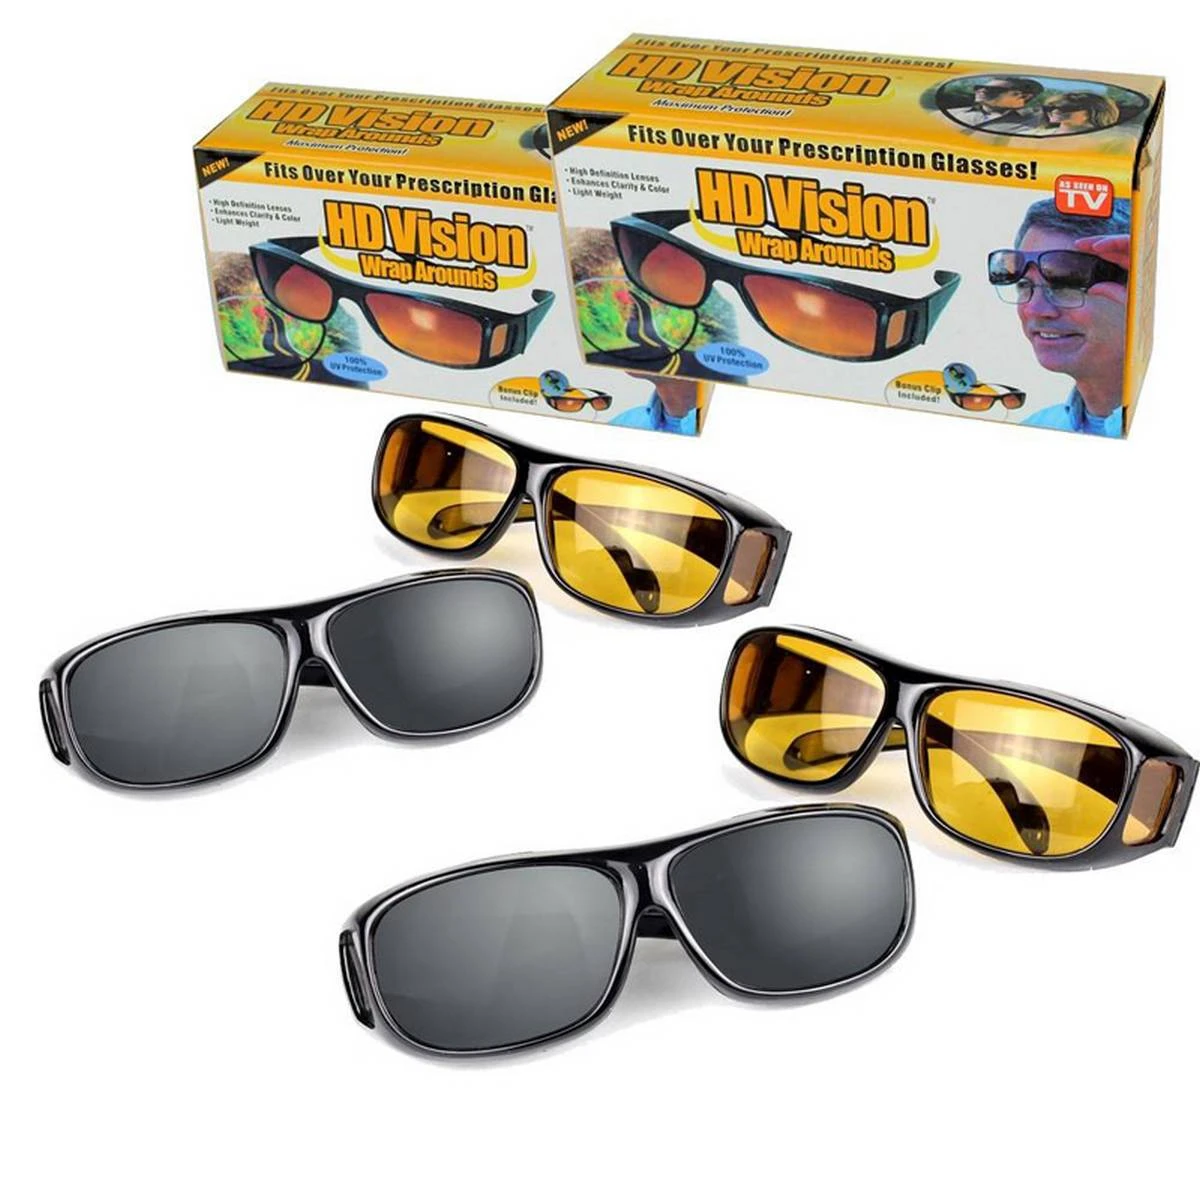 2 In 1 HD Vision Wrap Day and Night Sunglasses - Sun Glass For Men